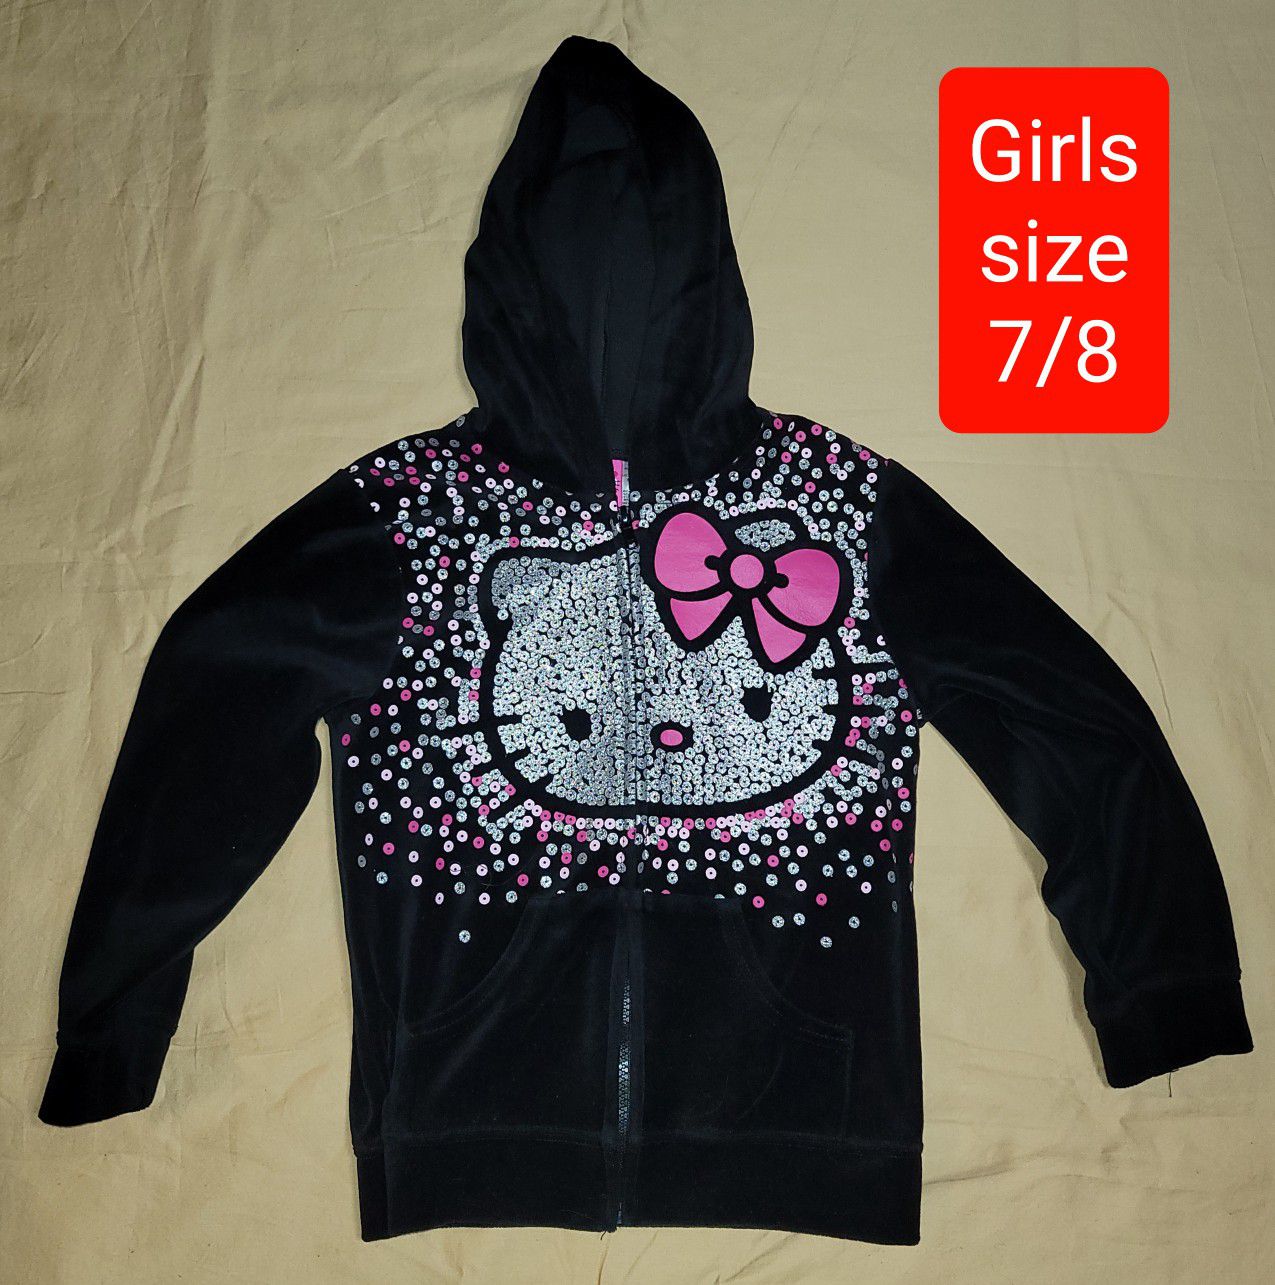 Girls size 7 / 8 clothes Black Hello Kitty Hooded Jacket (#579)